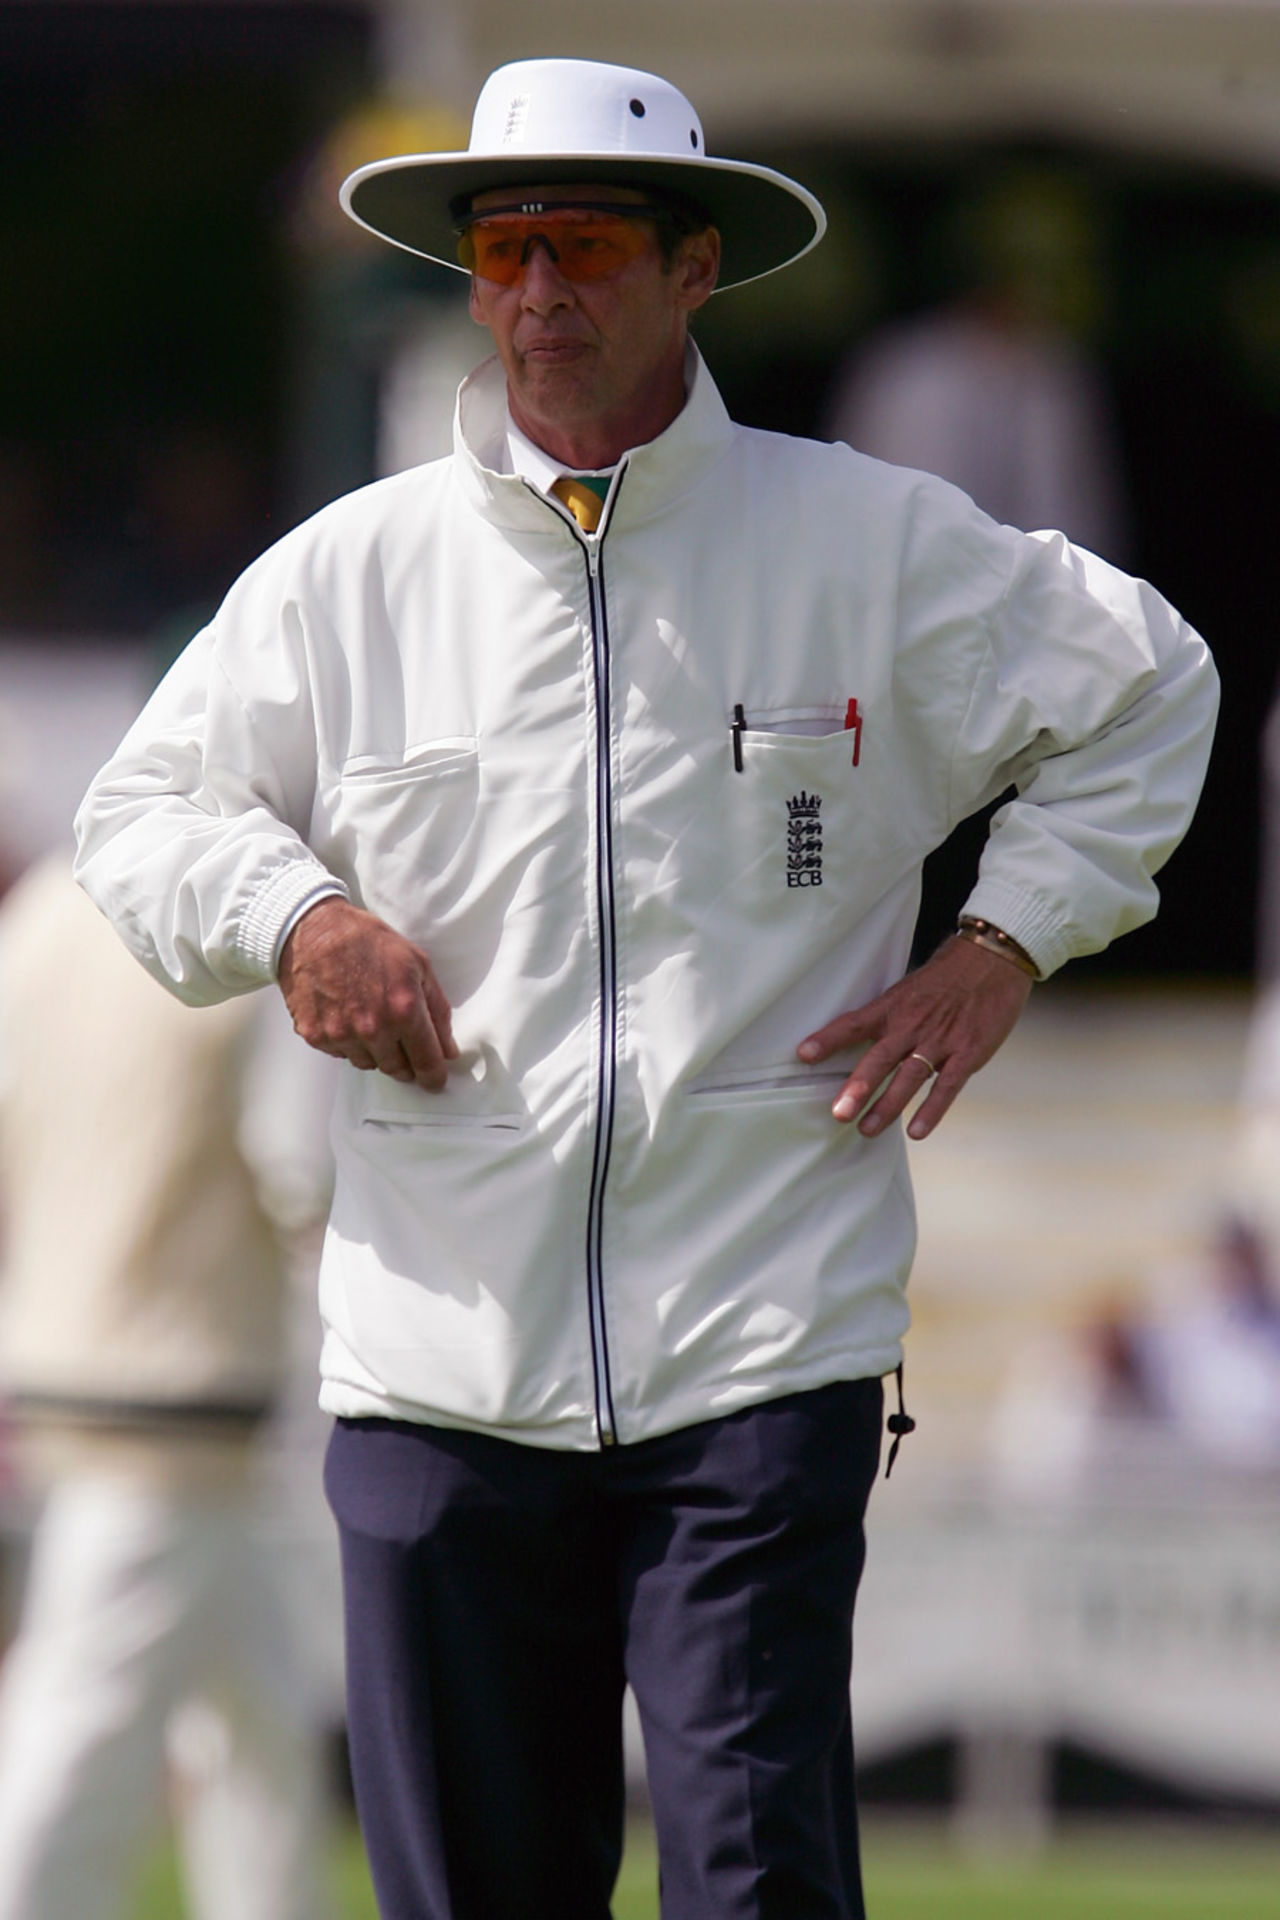 Jeremy Lloyds was one of the on-field umpires, Worcestershire v Lancashire, County Championship Division Two, Worcester, 3rd day, April 29, 2005